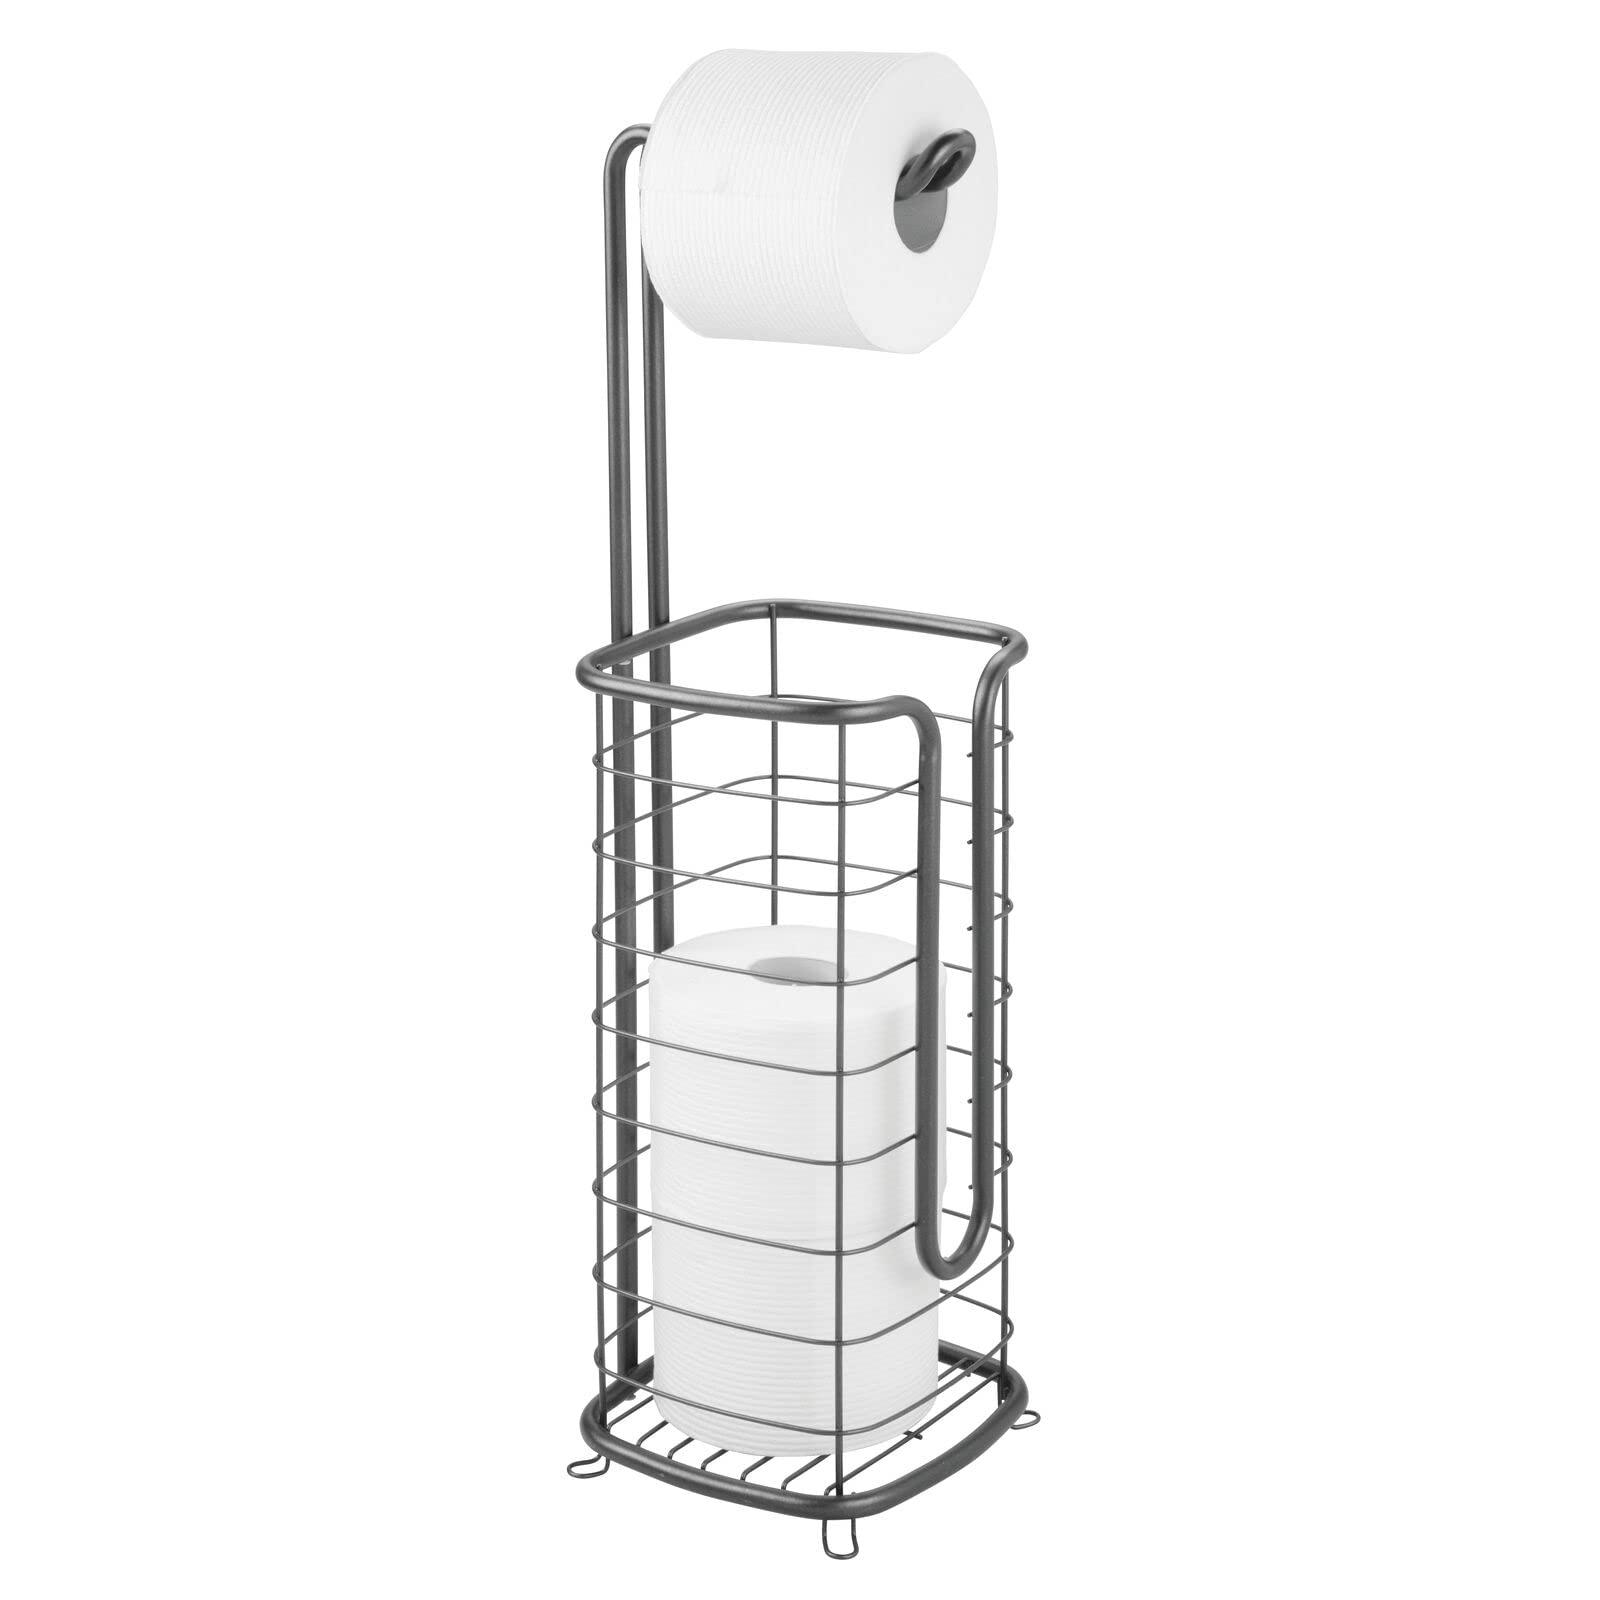 mDesign Free Standing Toilet Roll Holder - Toilet Paper Holder for the Bathroom - Loo Roll Holder with Storage Space for Extra Rolls - Dark Grey